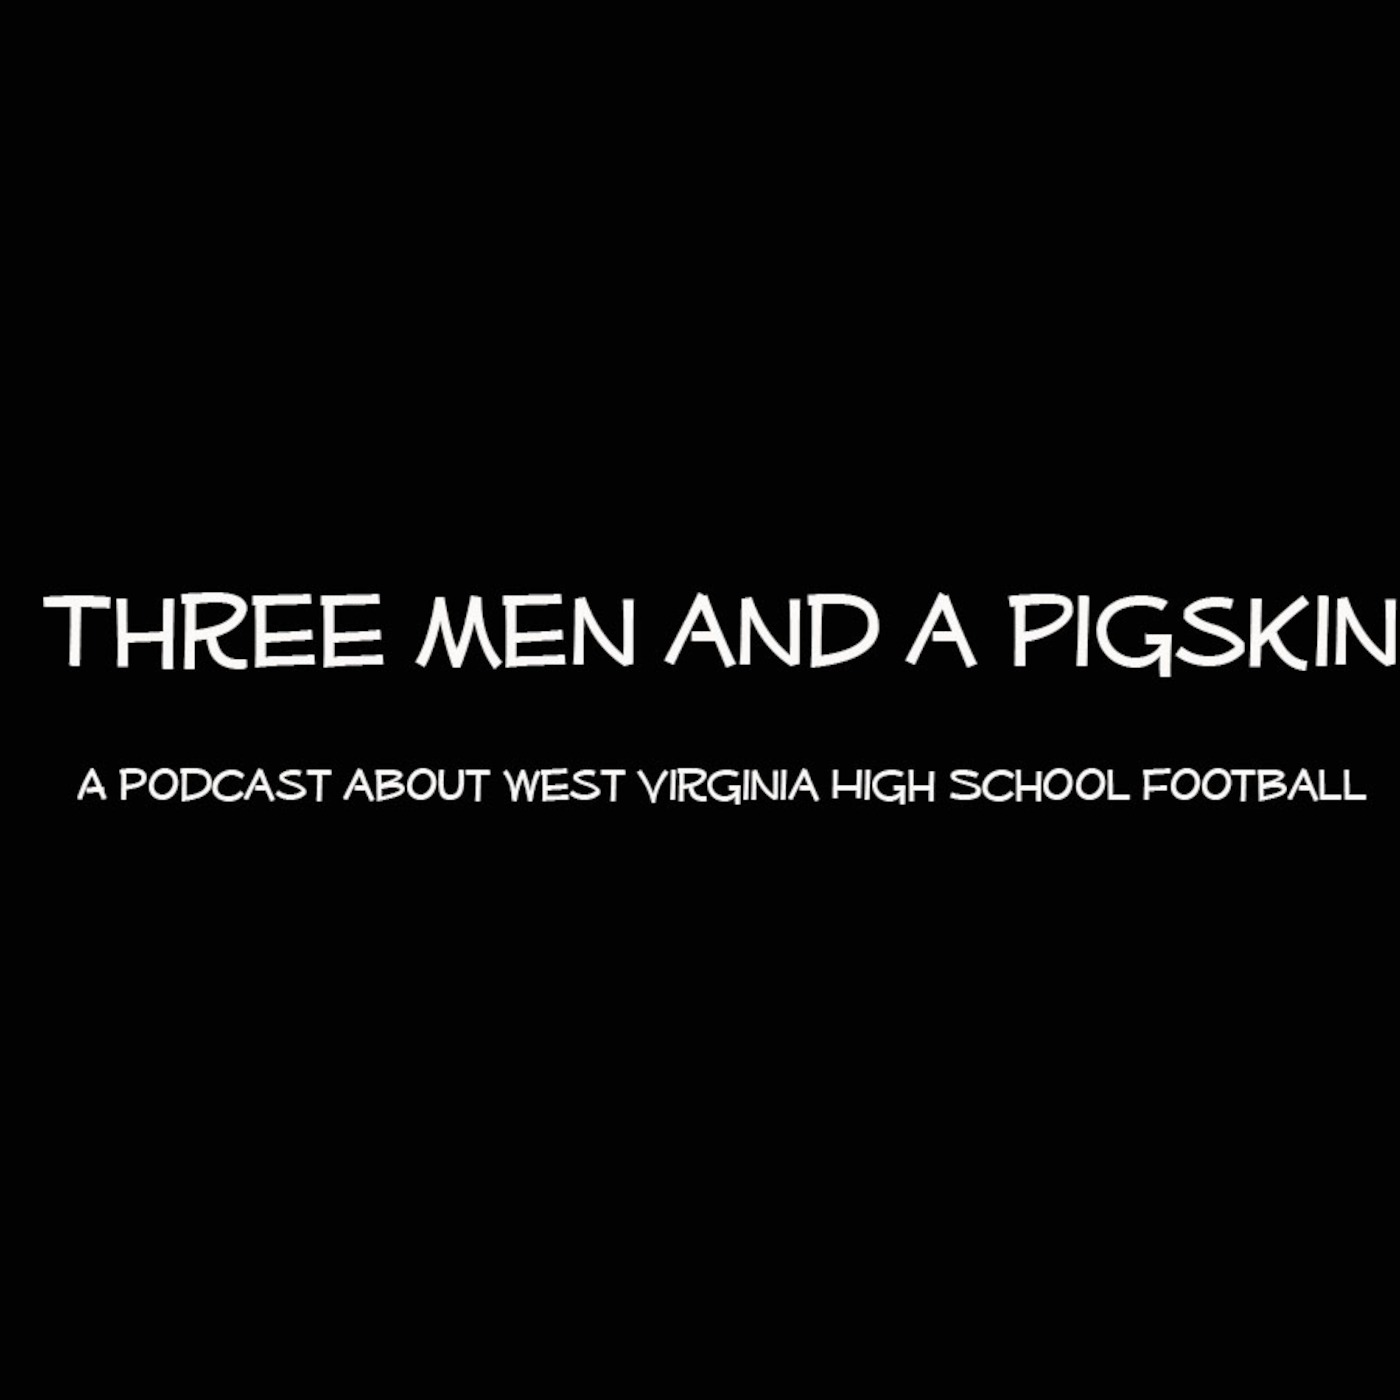 Three Men and a Pigskin's Podcast